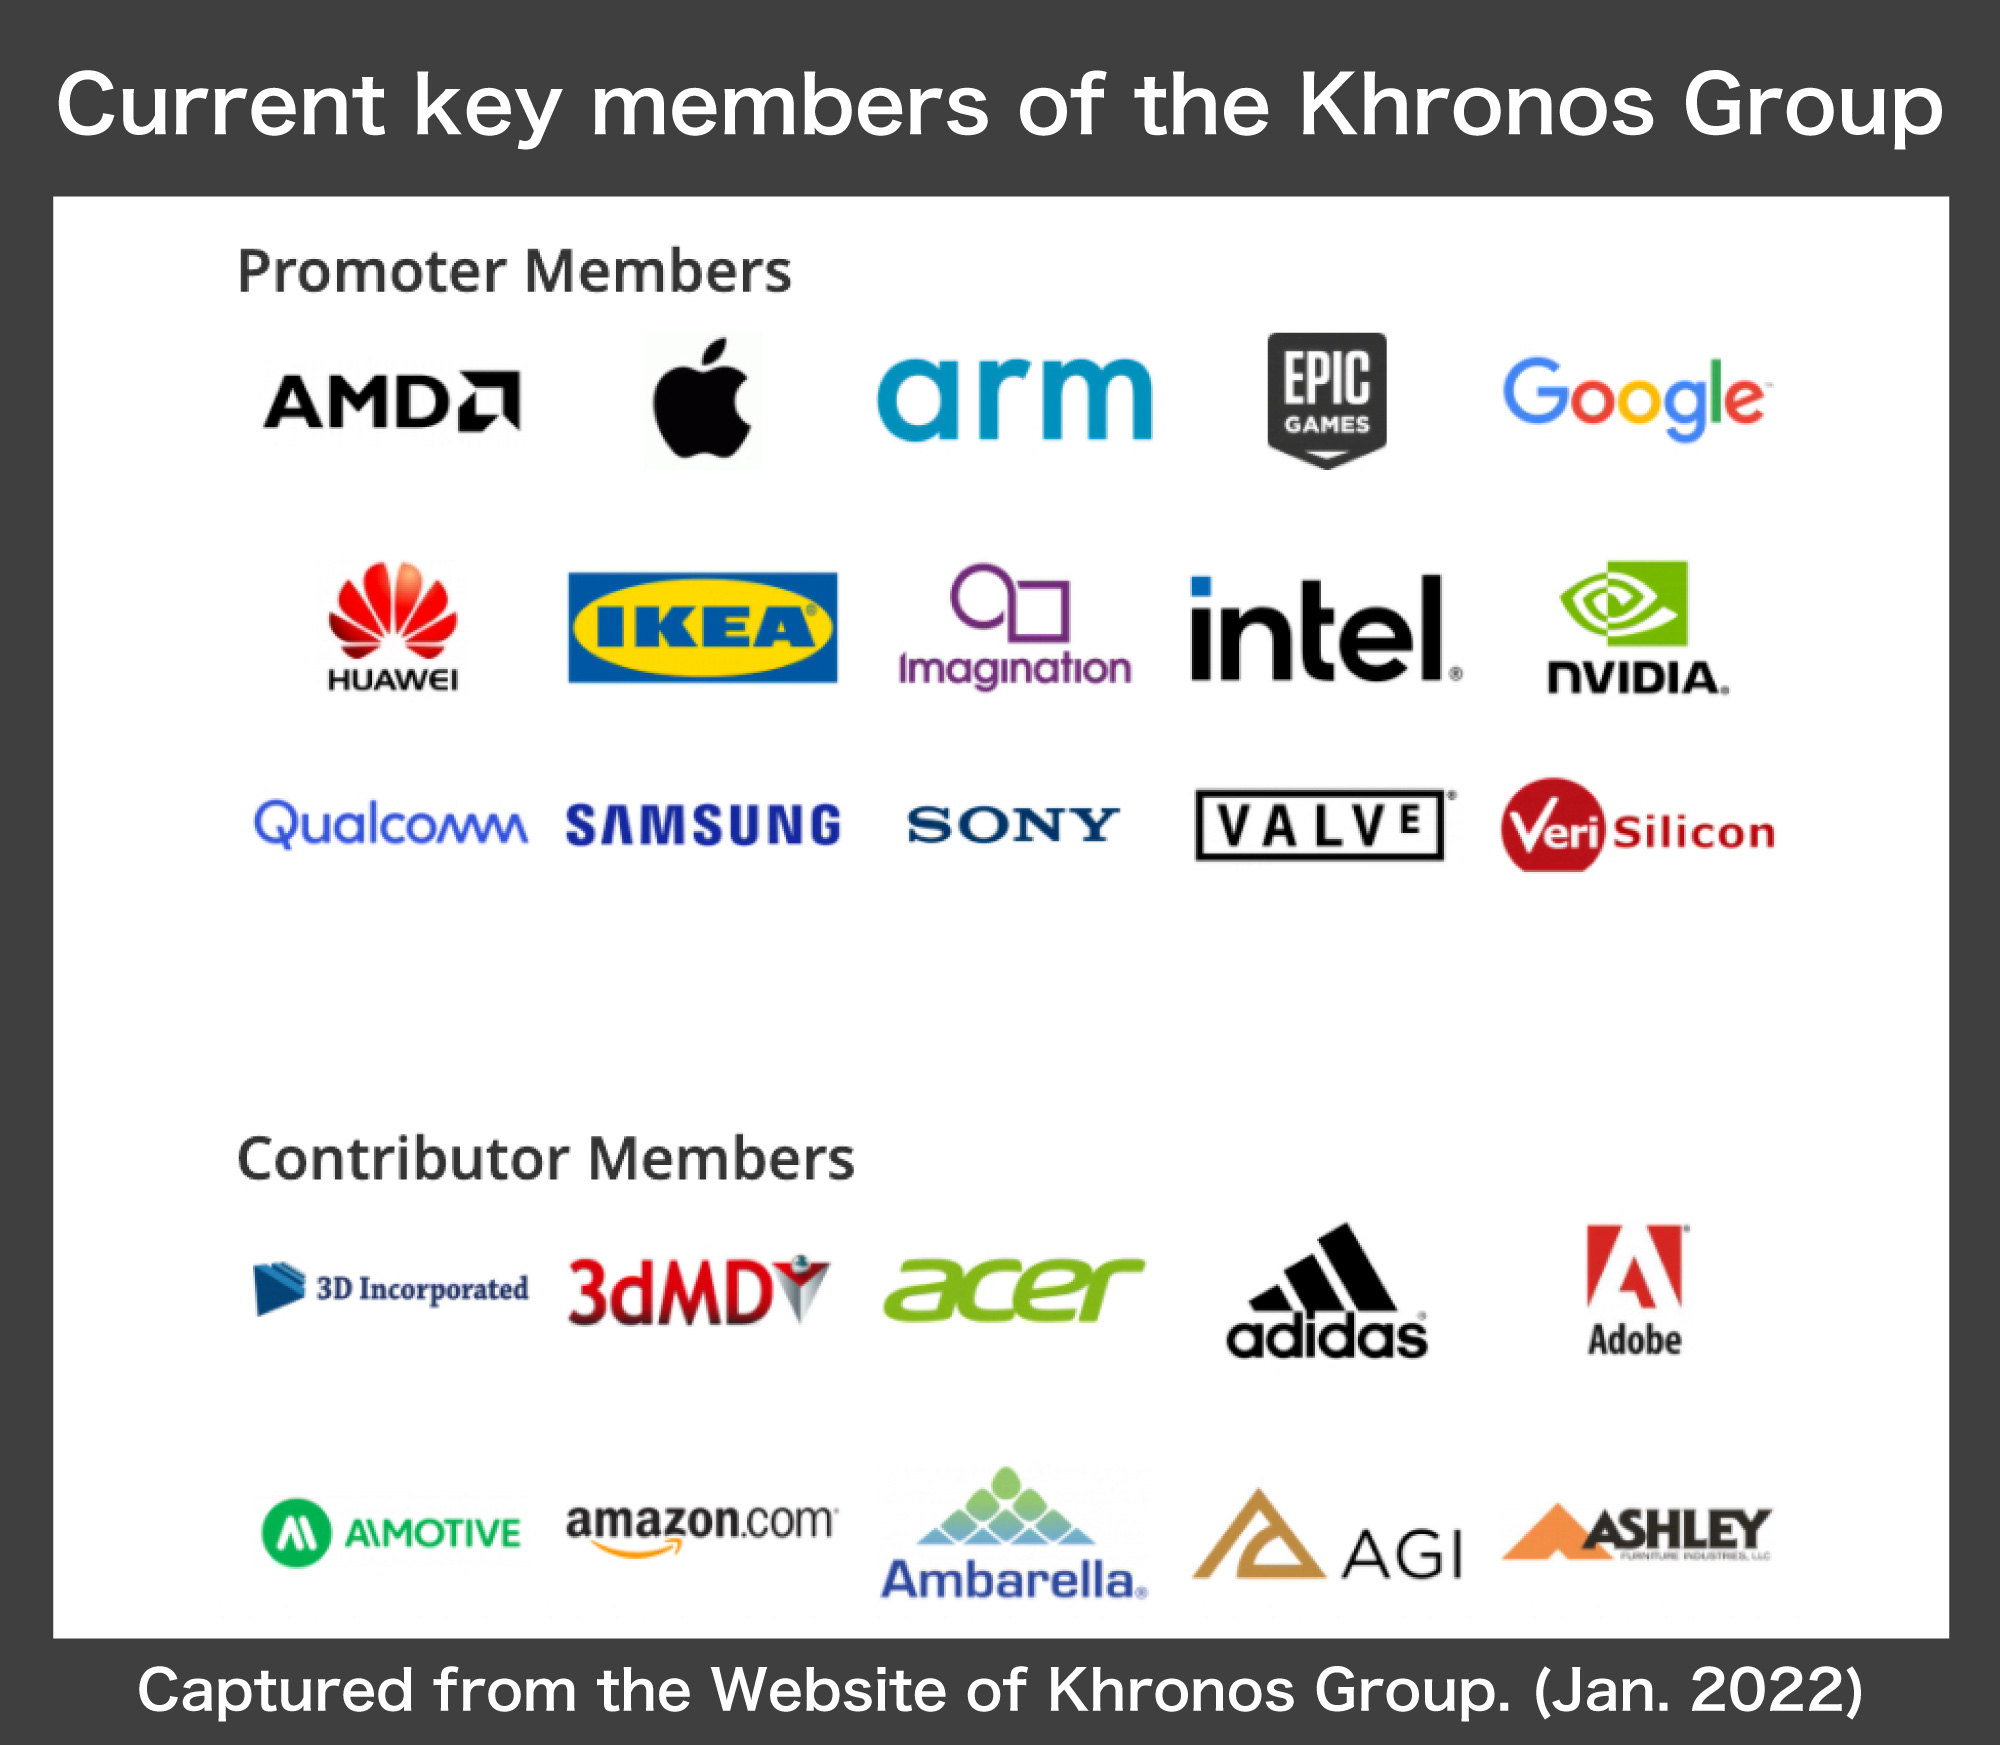 The key members of the Khronos Group